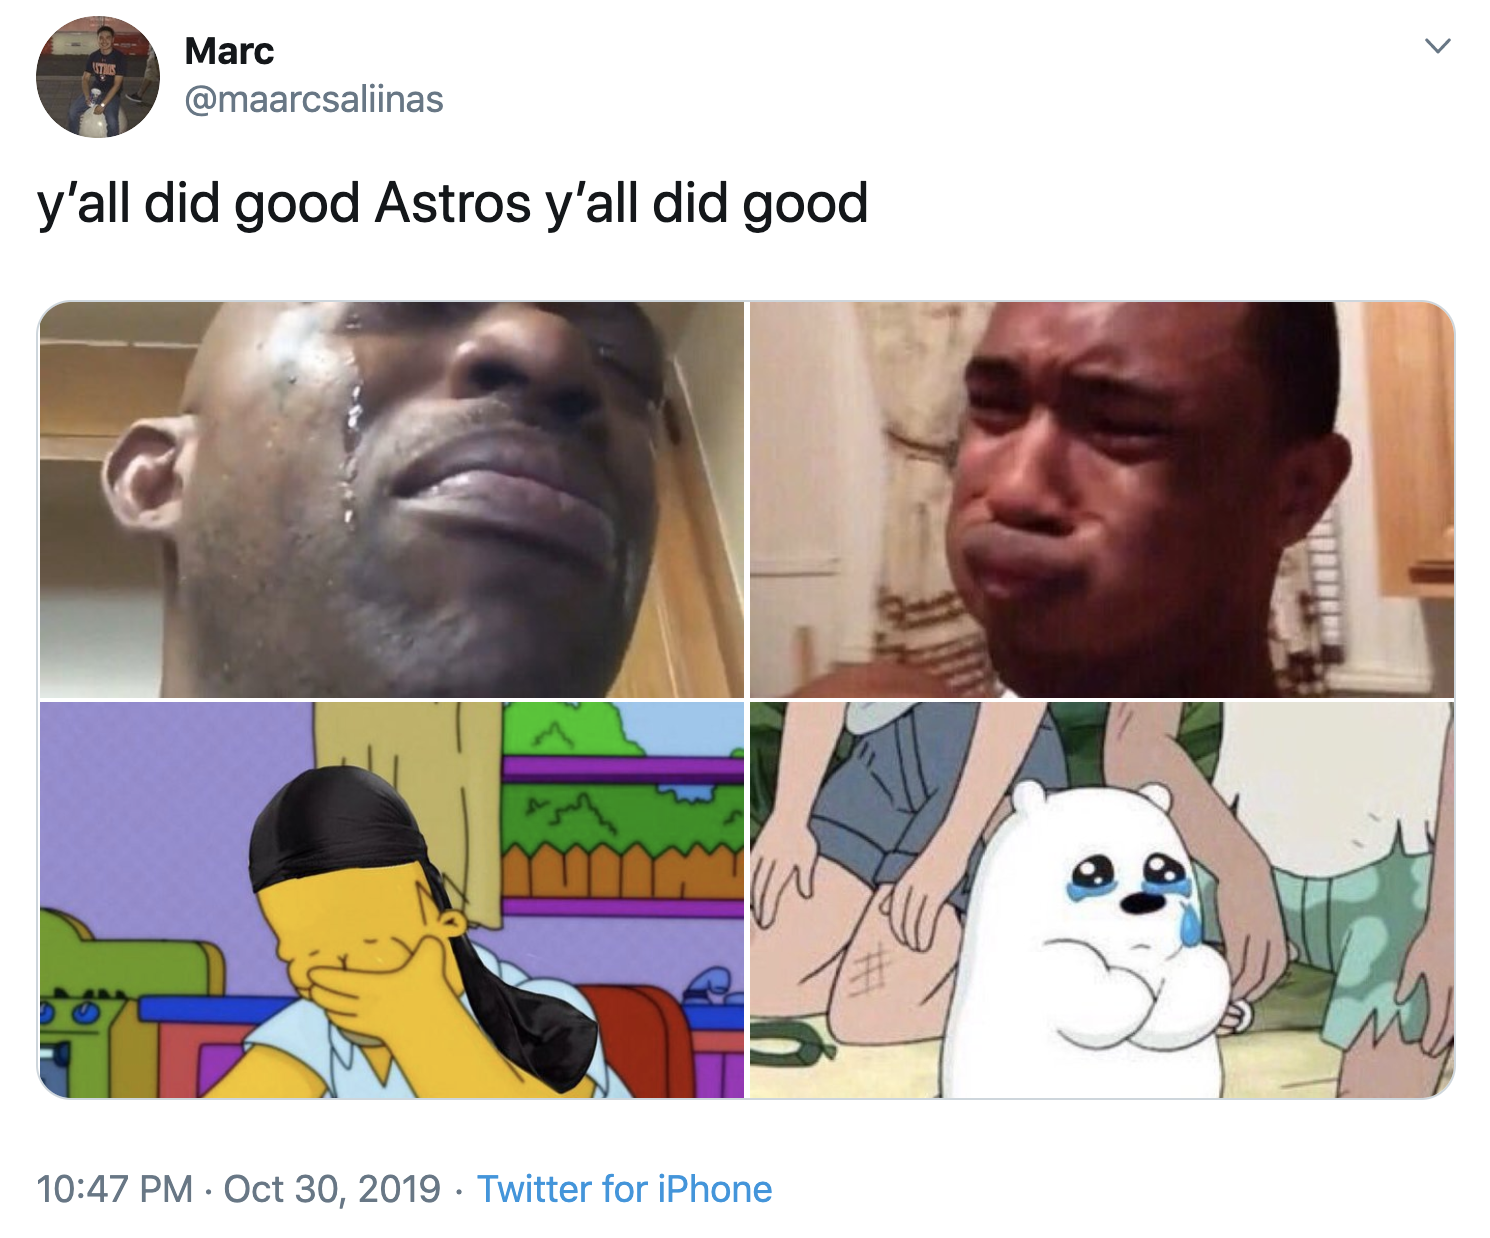 Memes, Houston celebrities react to Astros losing the World Series